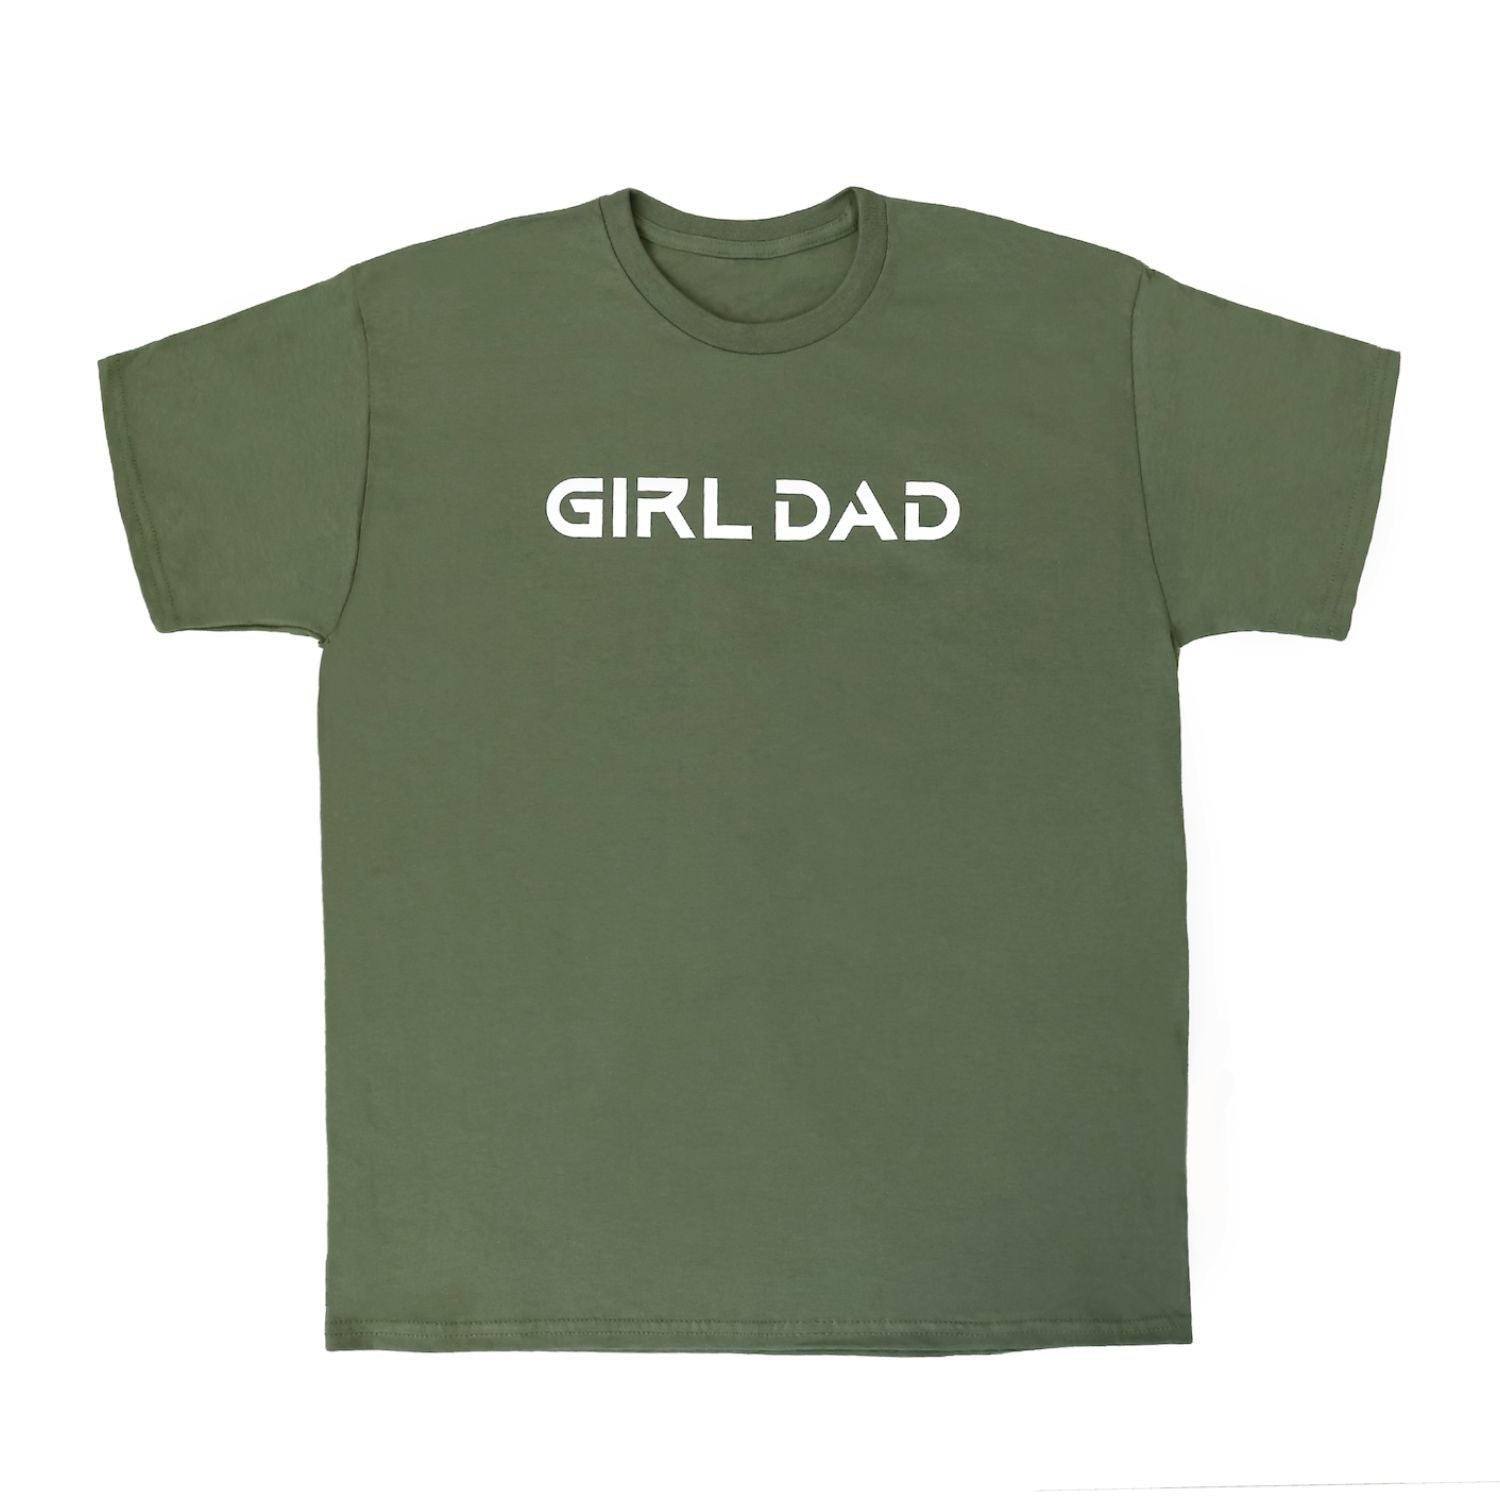 The Baby Cubby Girl Dad Tee Shirt - Military Green